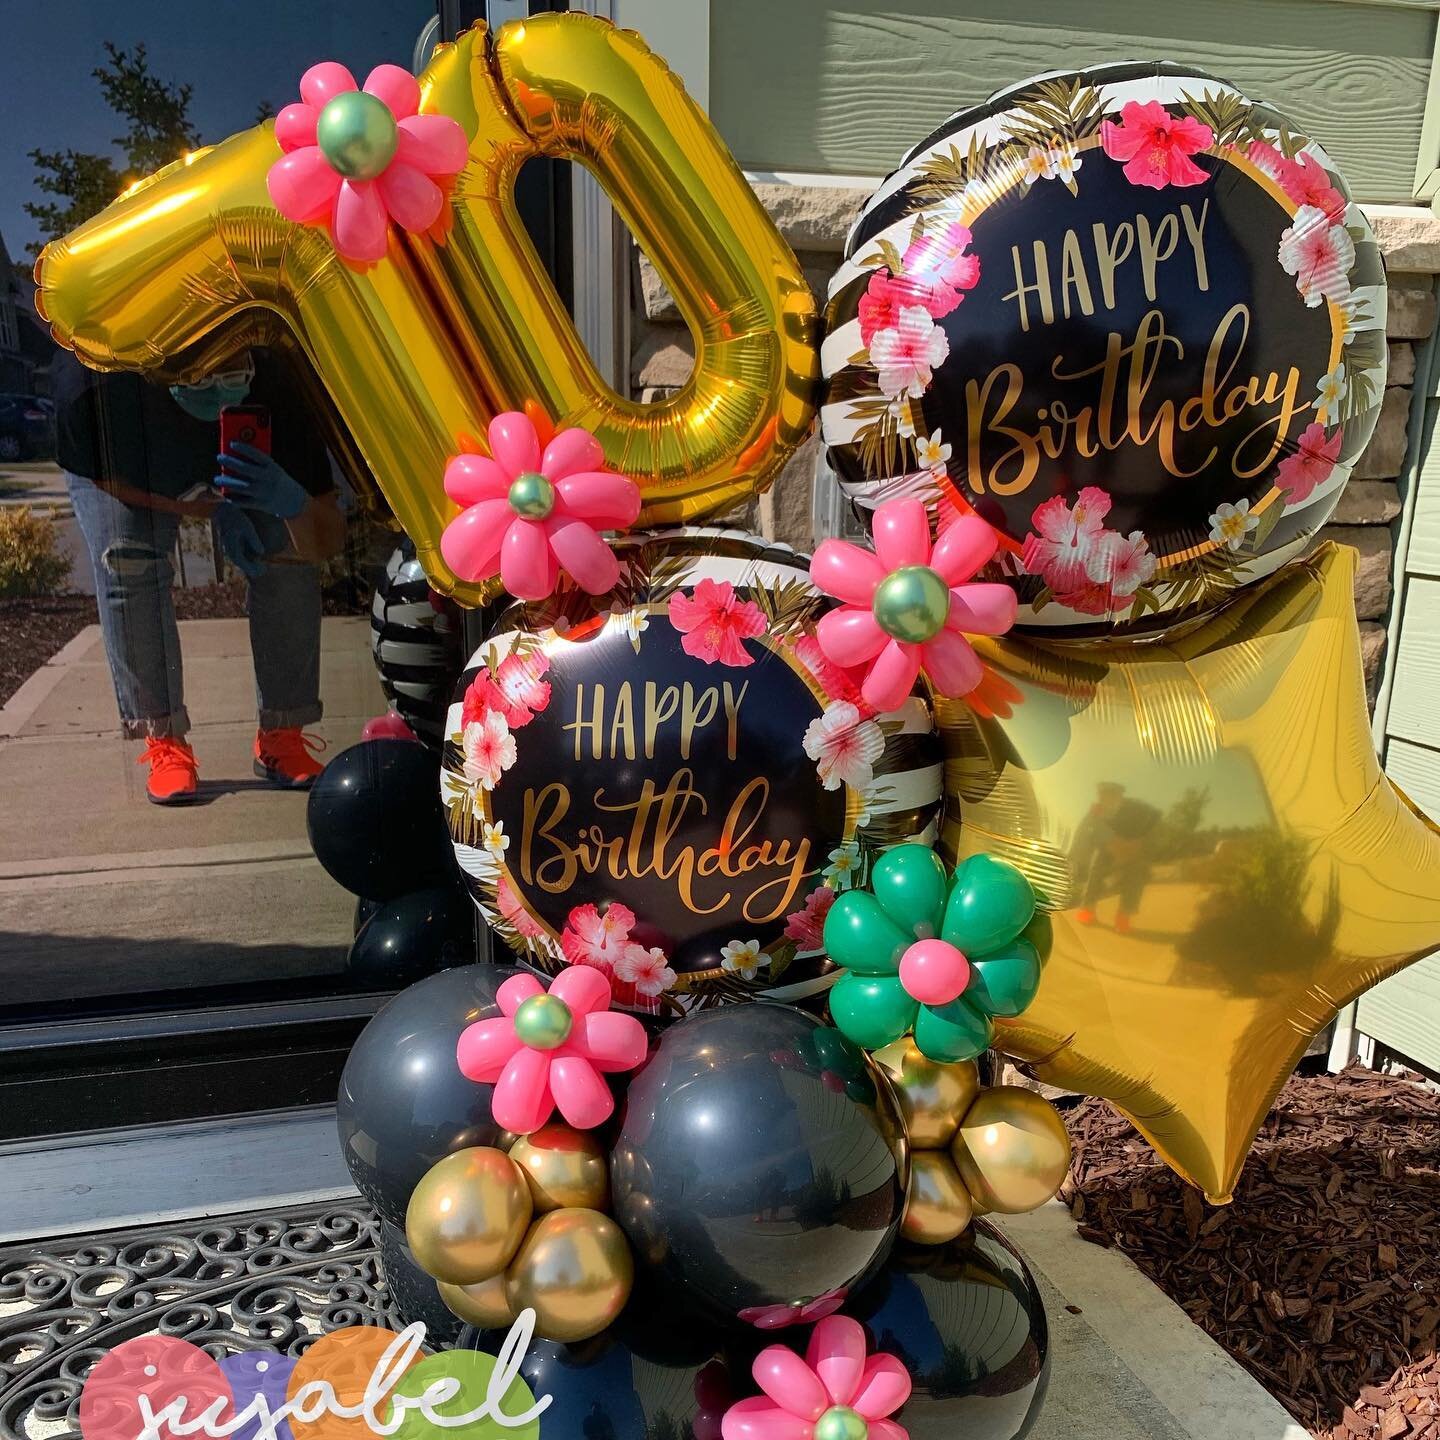 Nailed it! Recreated one of Liz Romani&rsquo;s designs for a client. 

#balloons #balloondecor #balloonbouquet #miniballoonmarquee #raleighballoons #ncballoons #ncevents #rdu #rtp #carync #jujabel